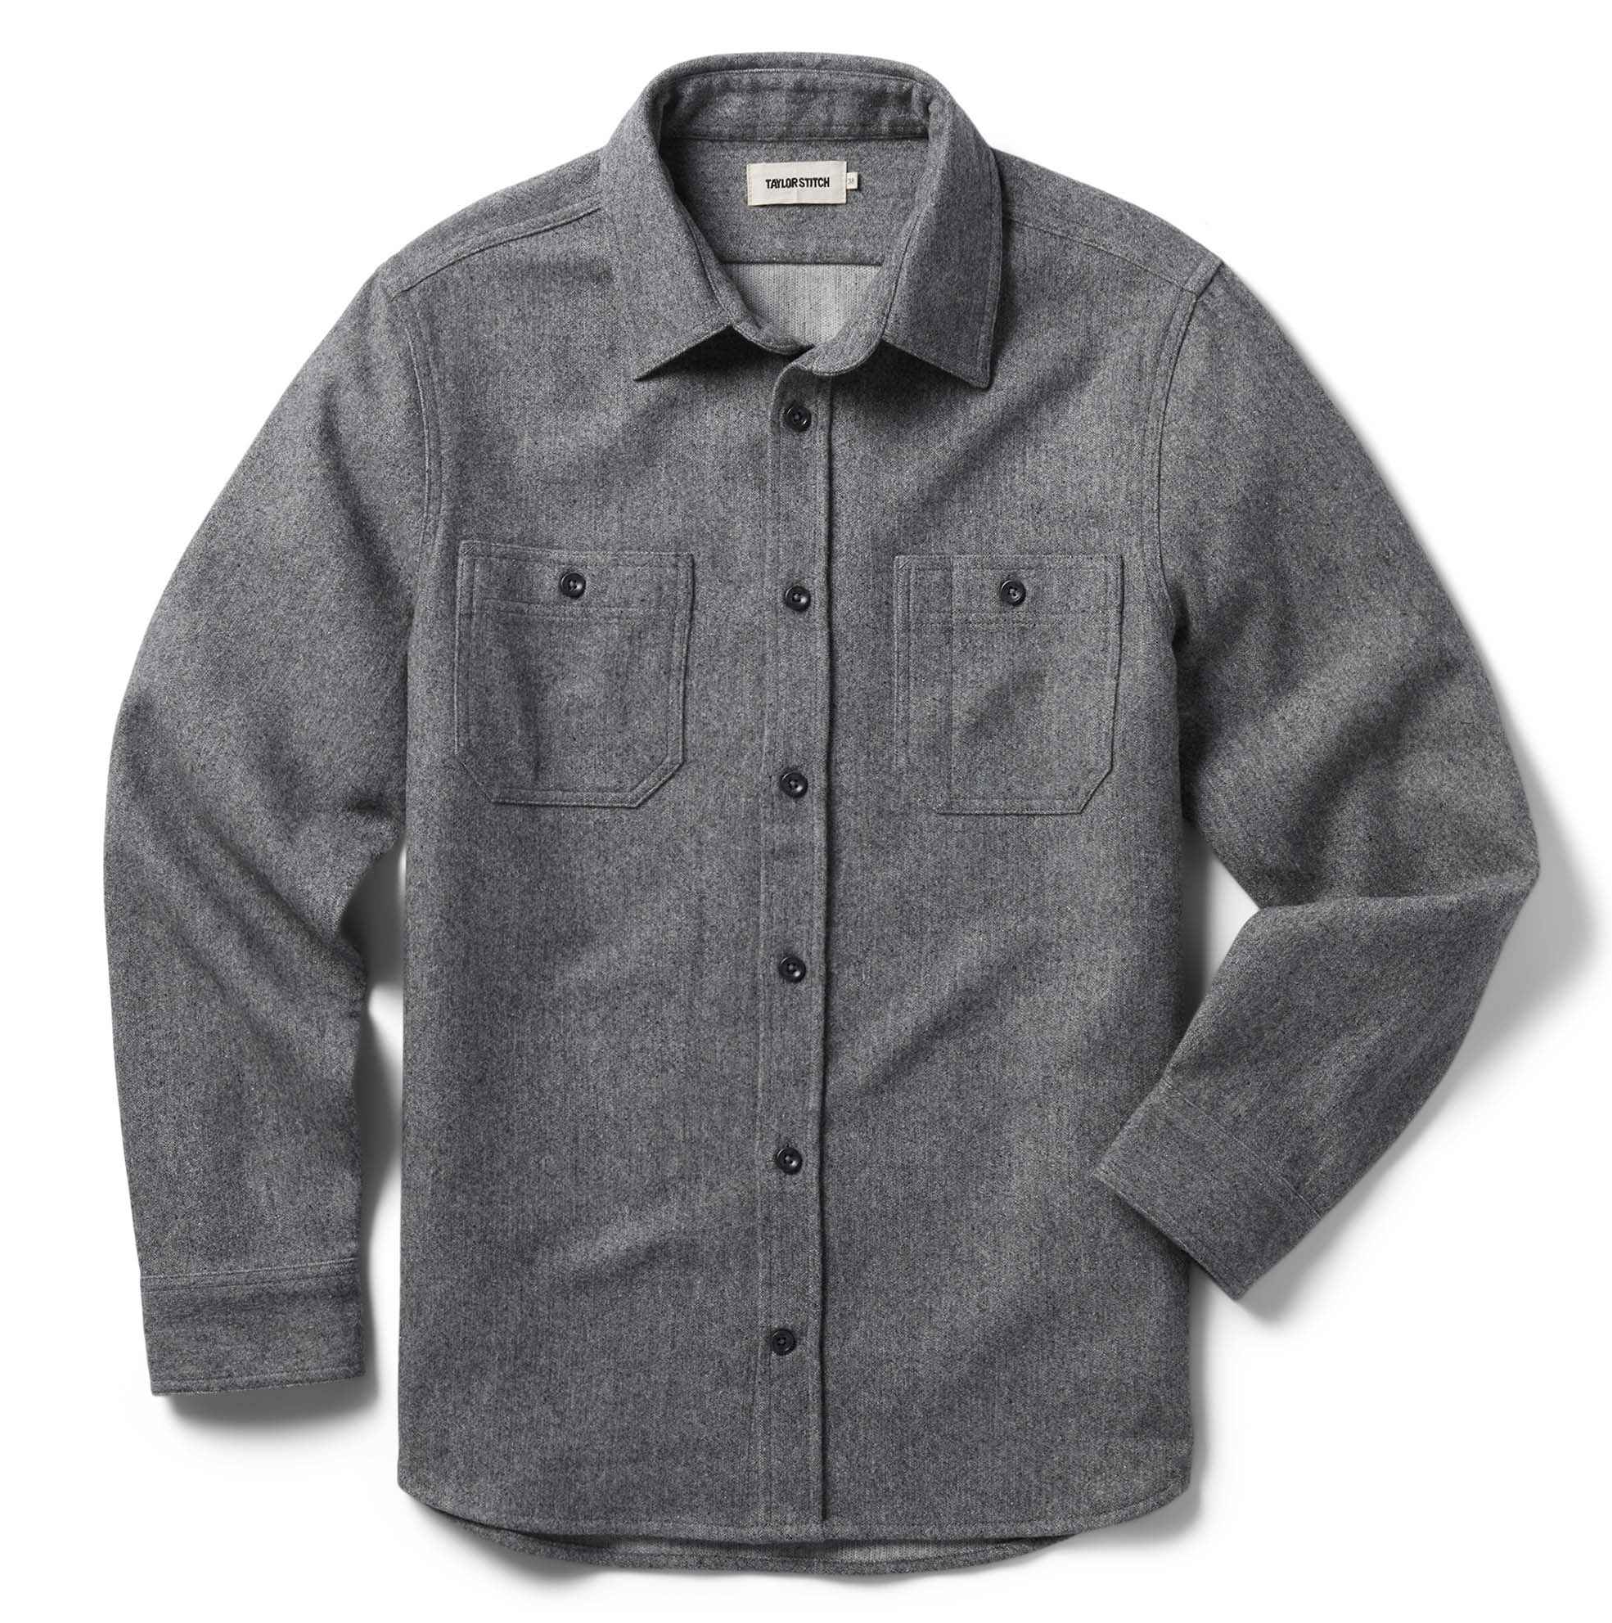 Taylor Stitch Utility Shirt in Ash Donegal Wool